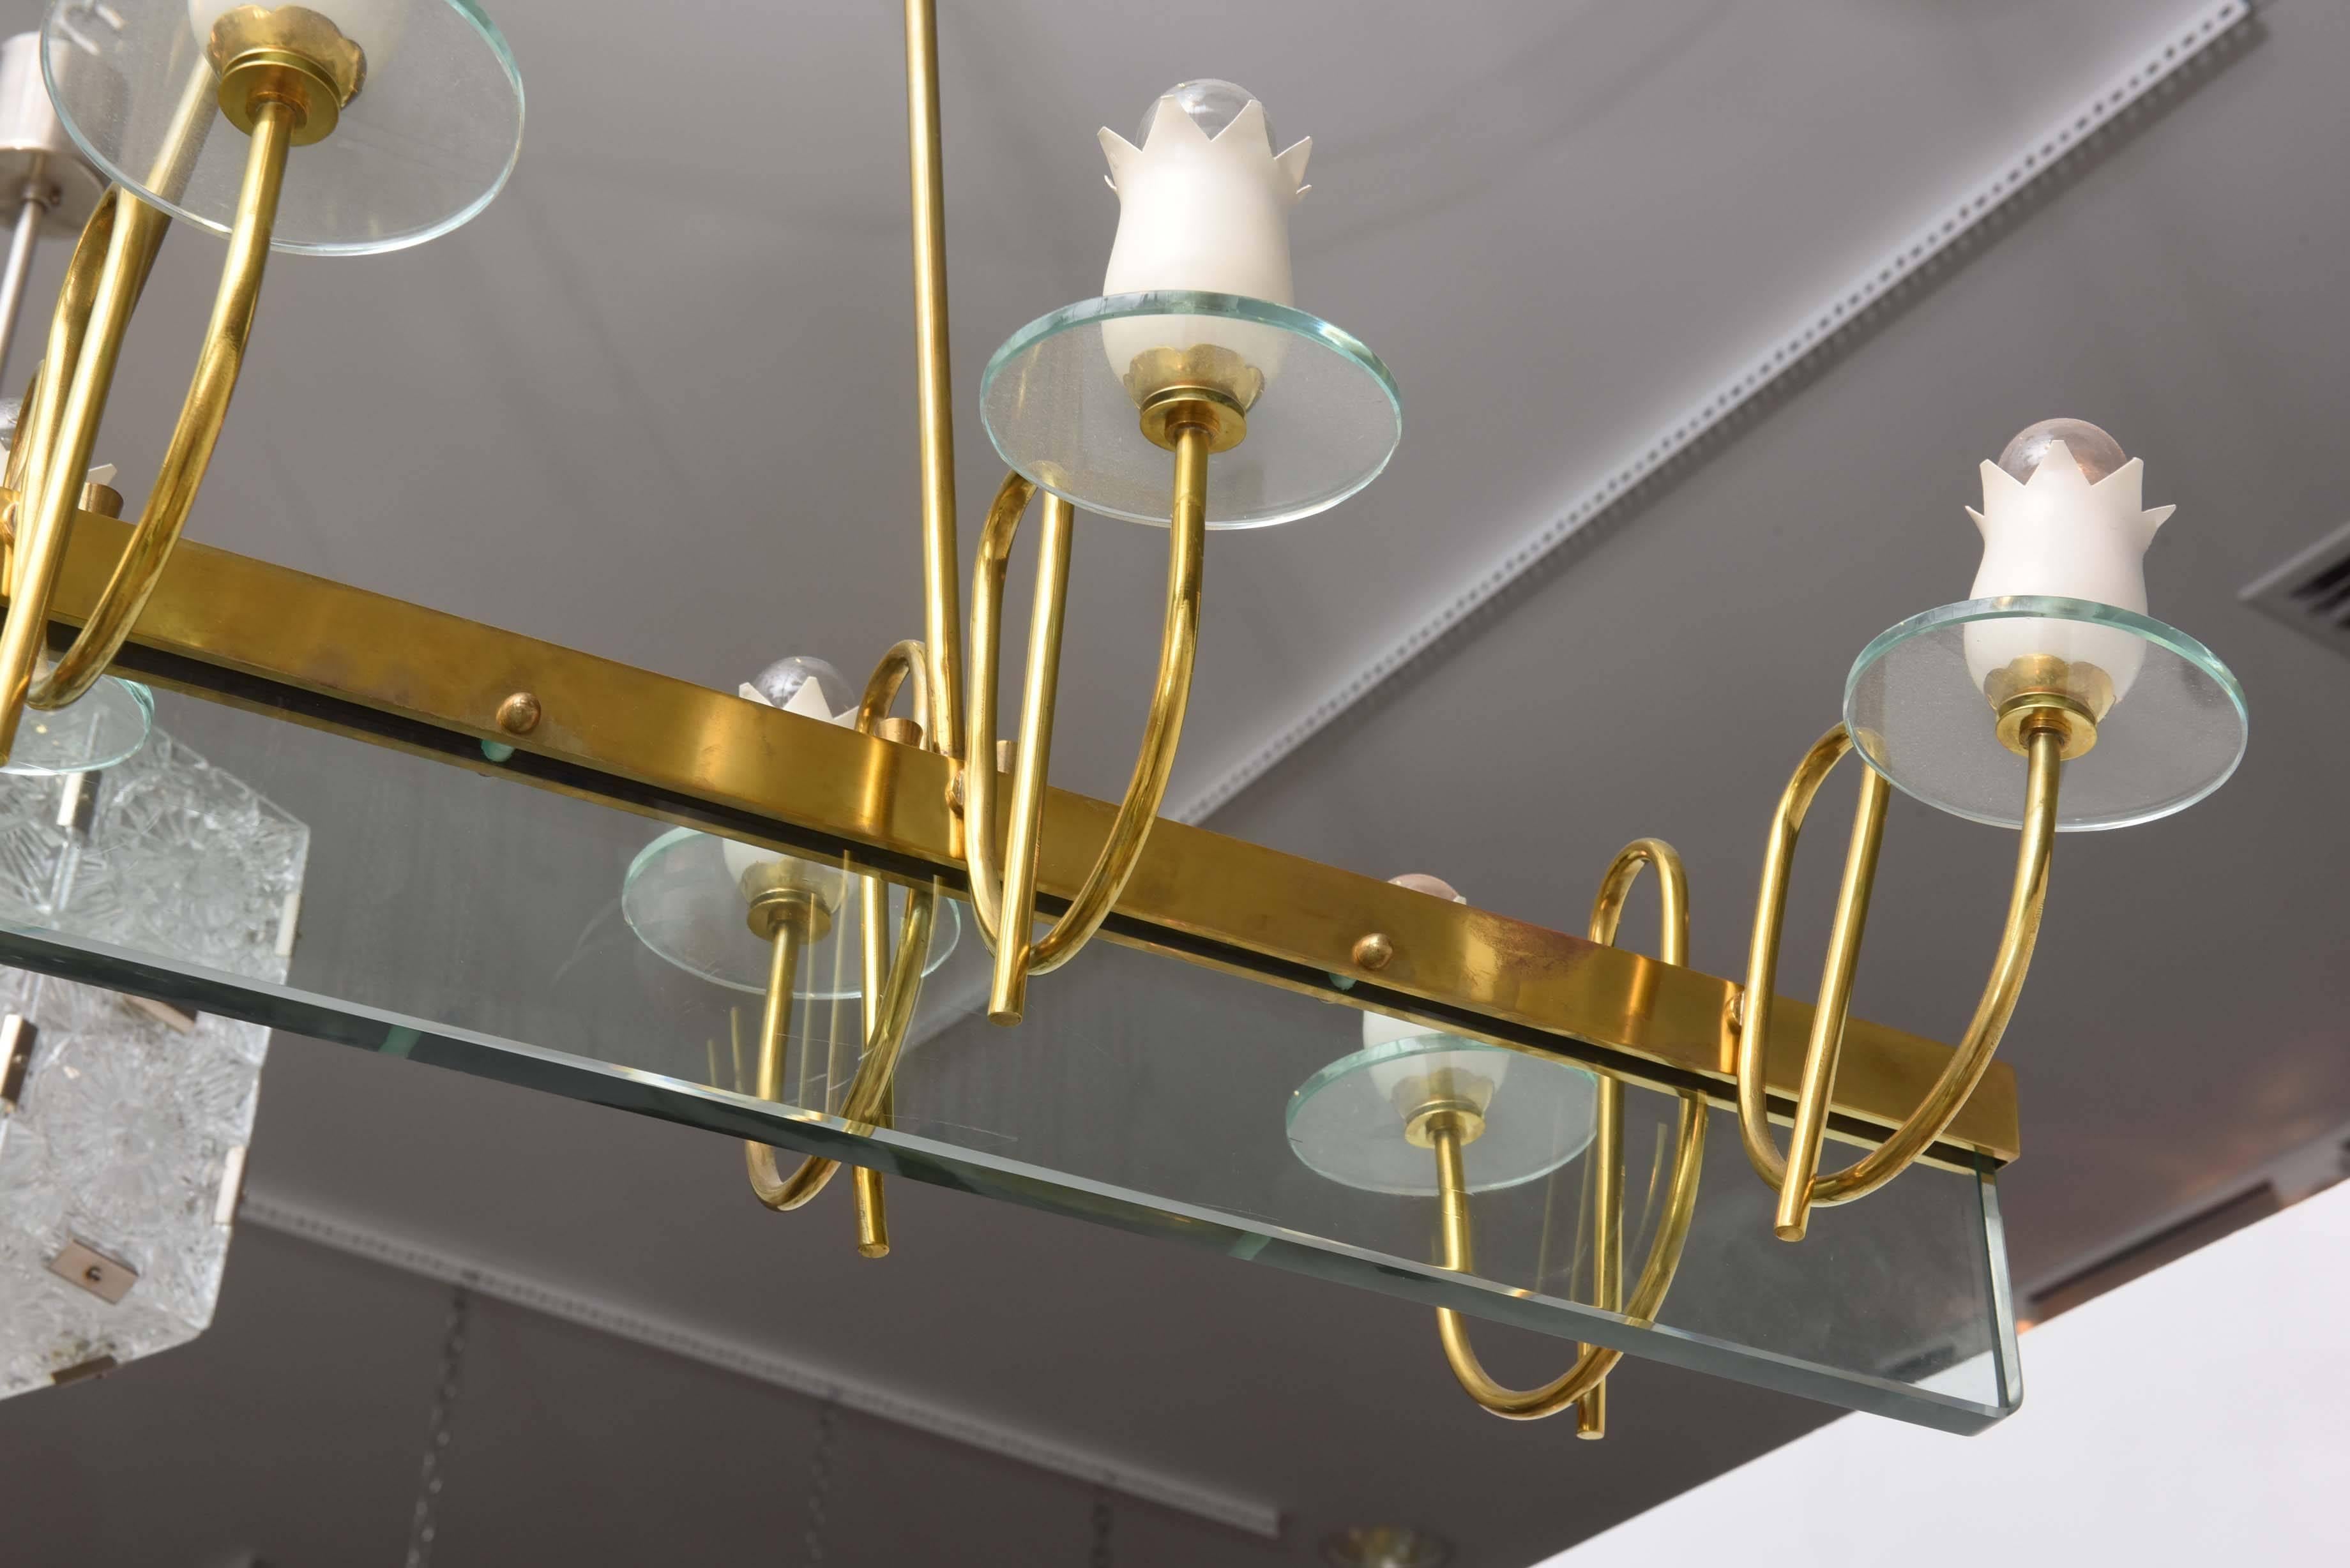 Brass and glass chandelier with enameled metal floral sockets in the style of Fontana Arte.